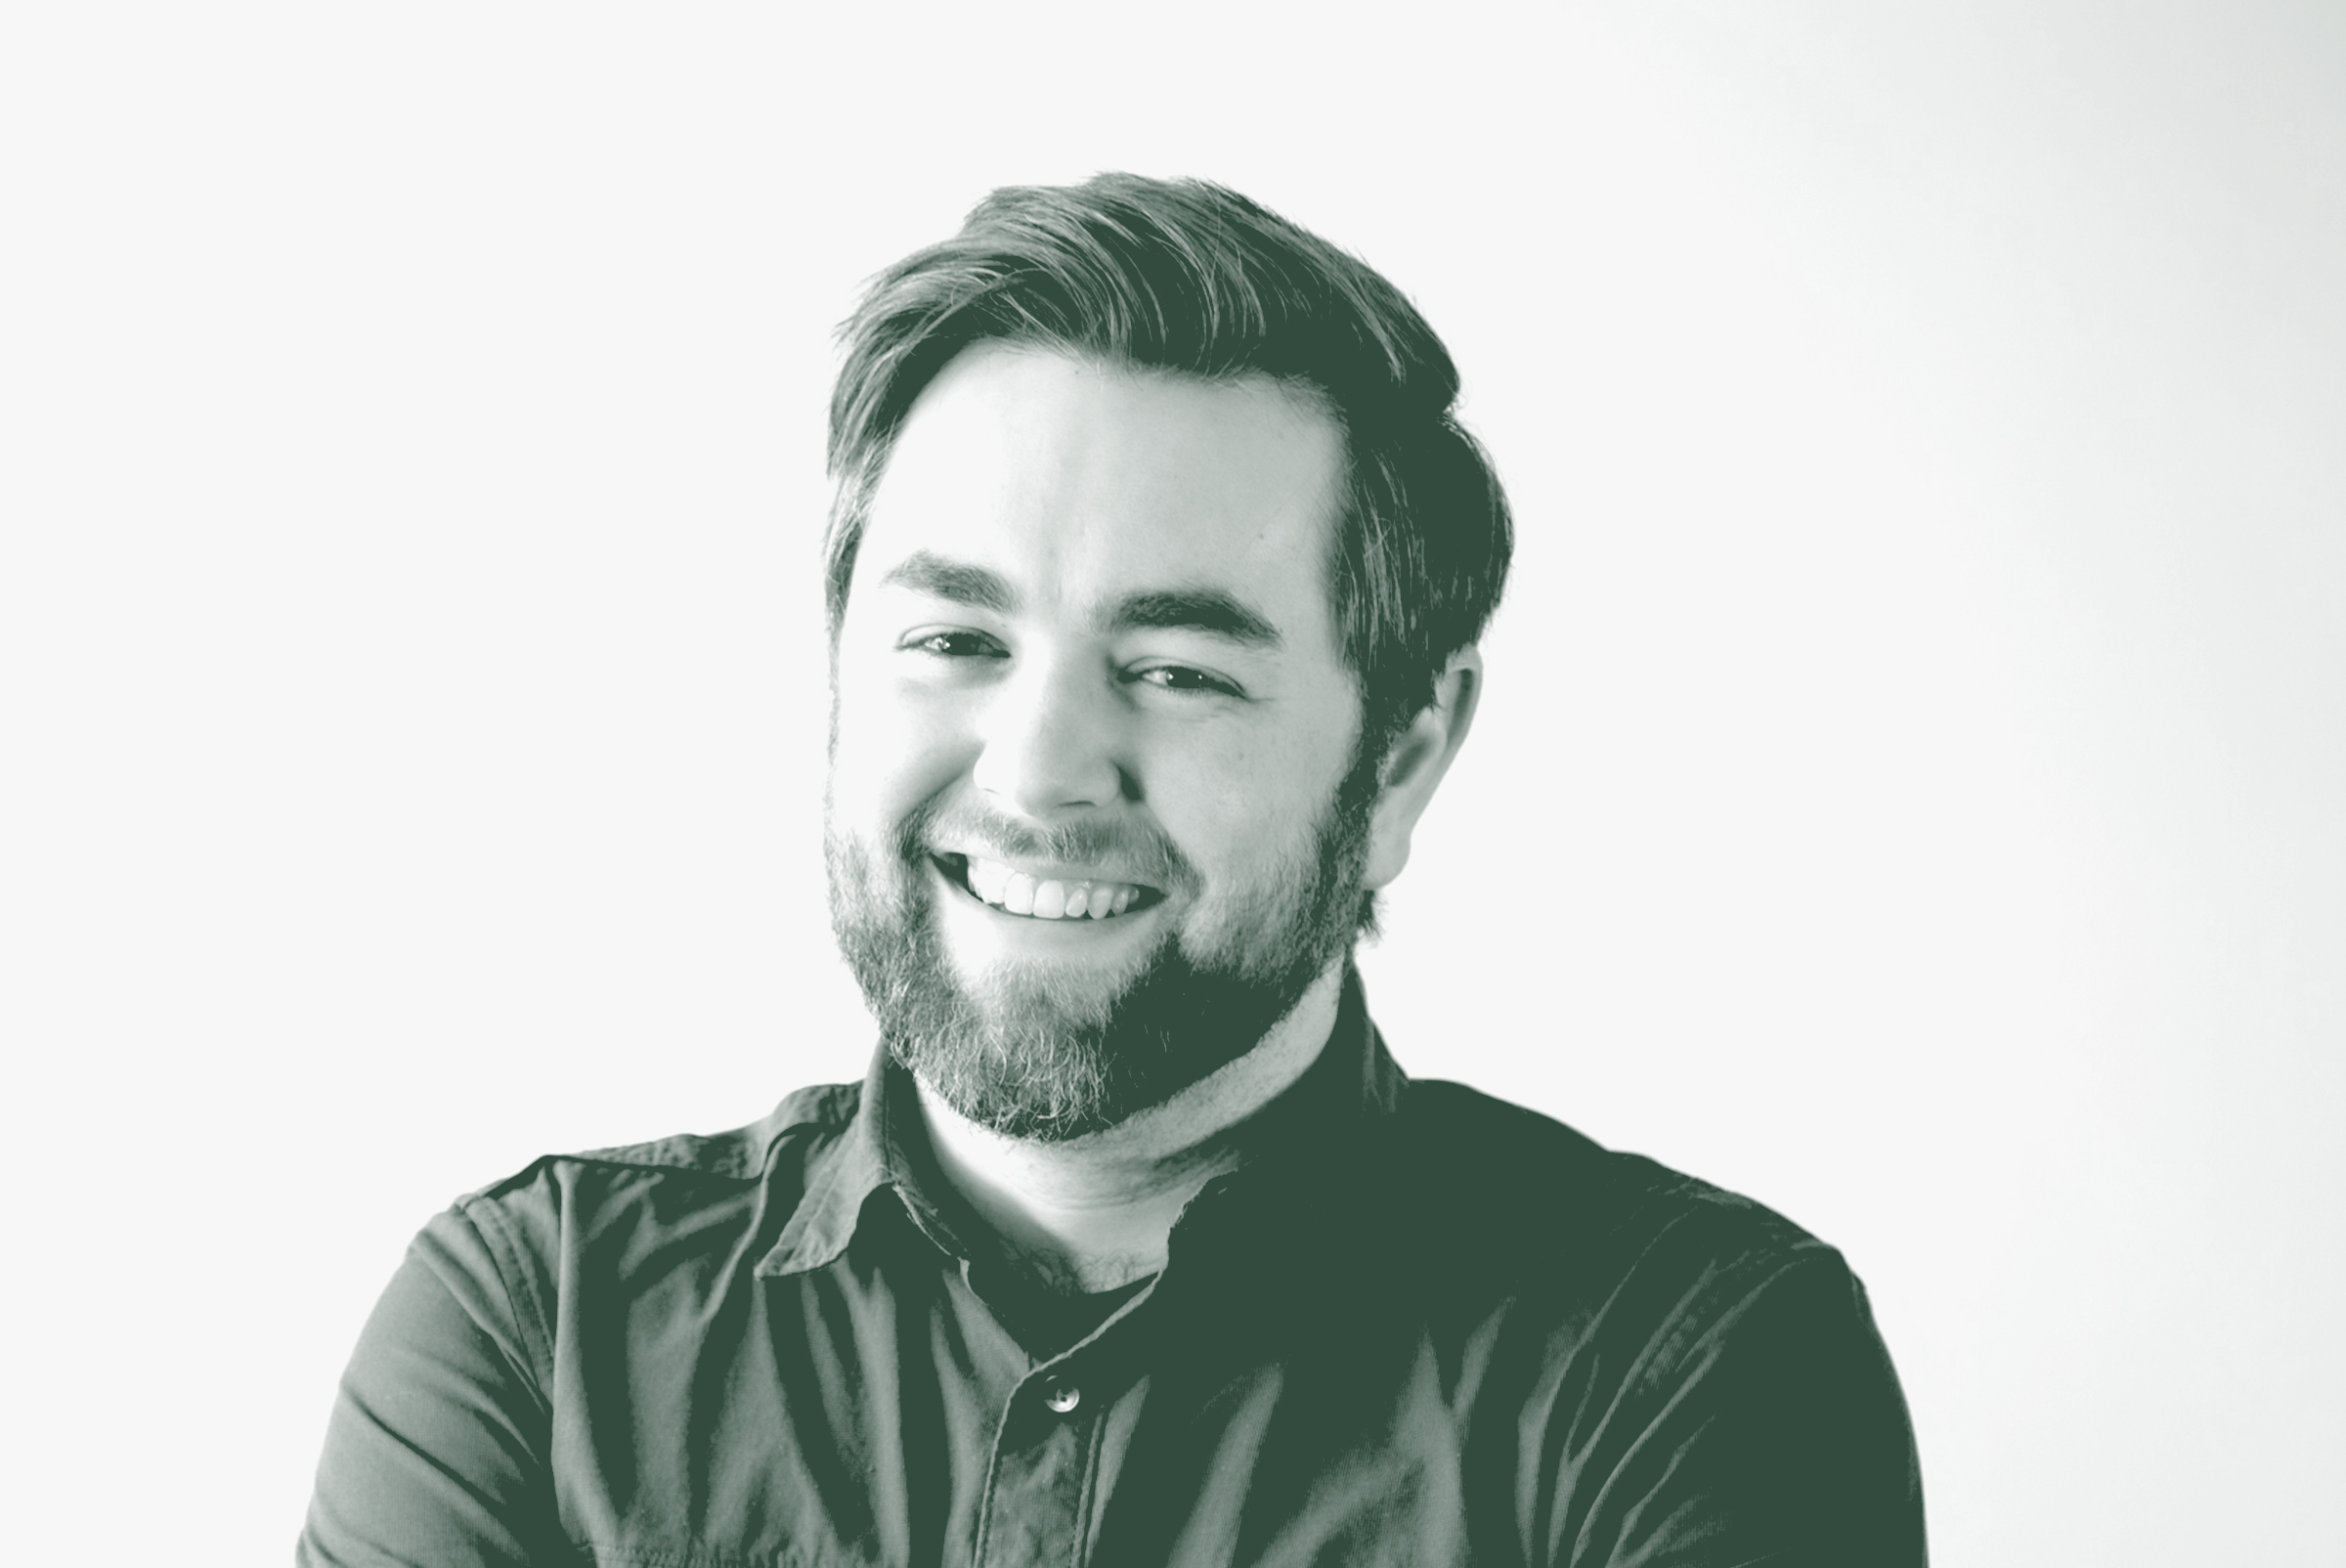 A black and white portrait of Josh Frederick, an Associate and Project Leader with GFF in the Mixed-Use & Multifamily Studio, in front of a white background.